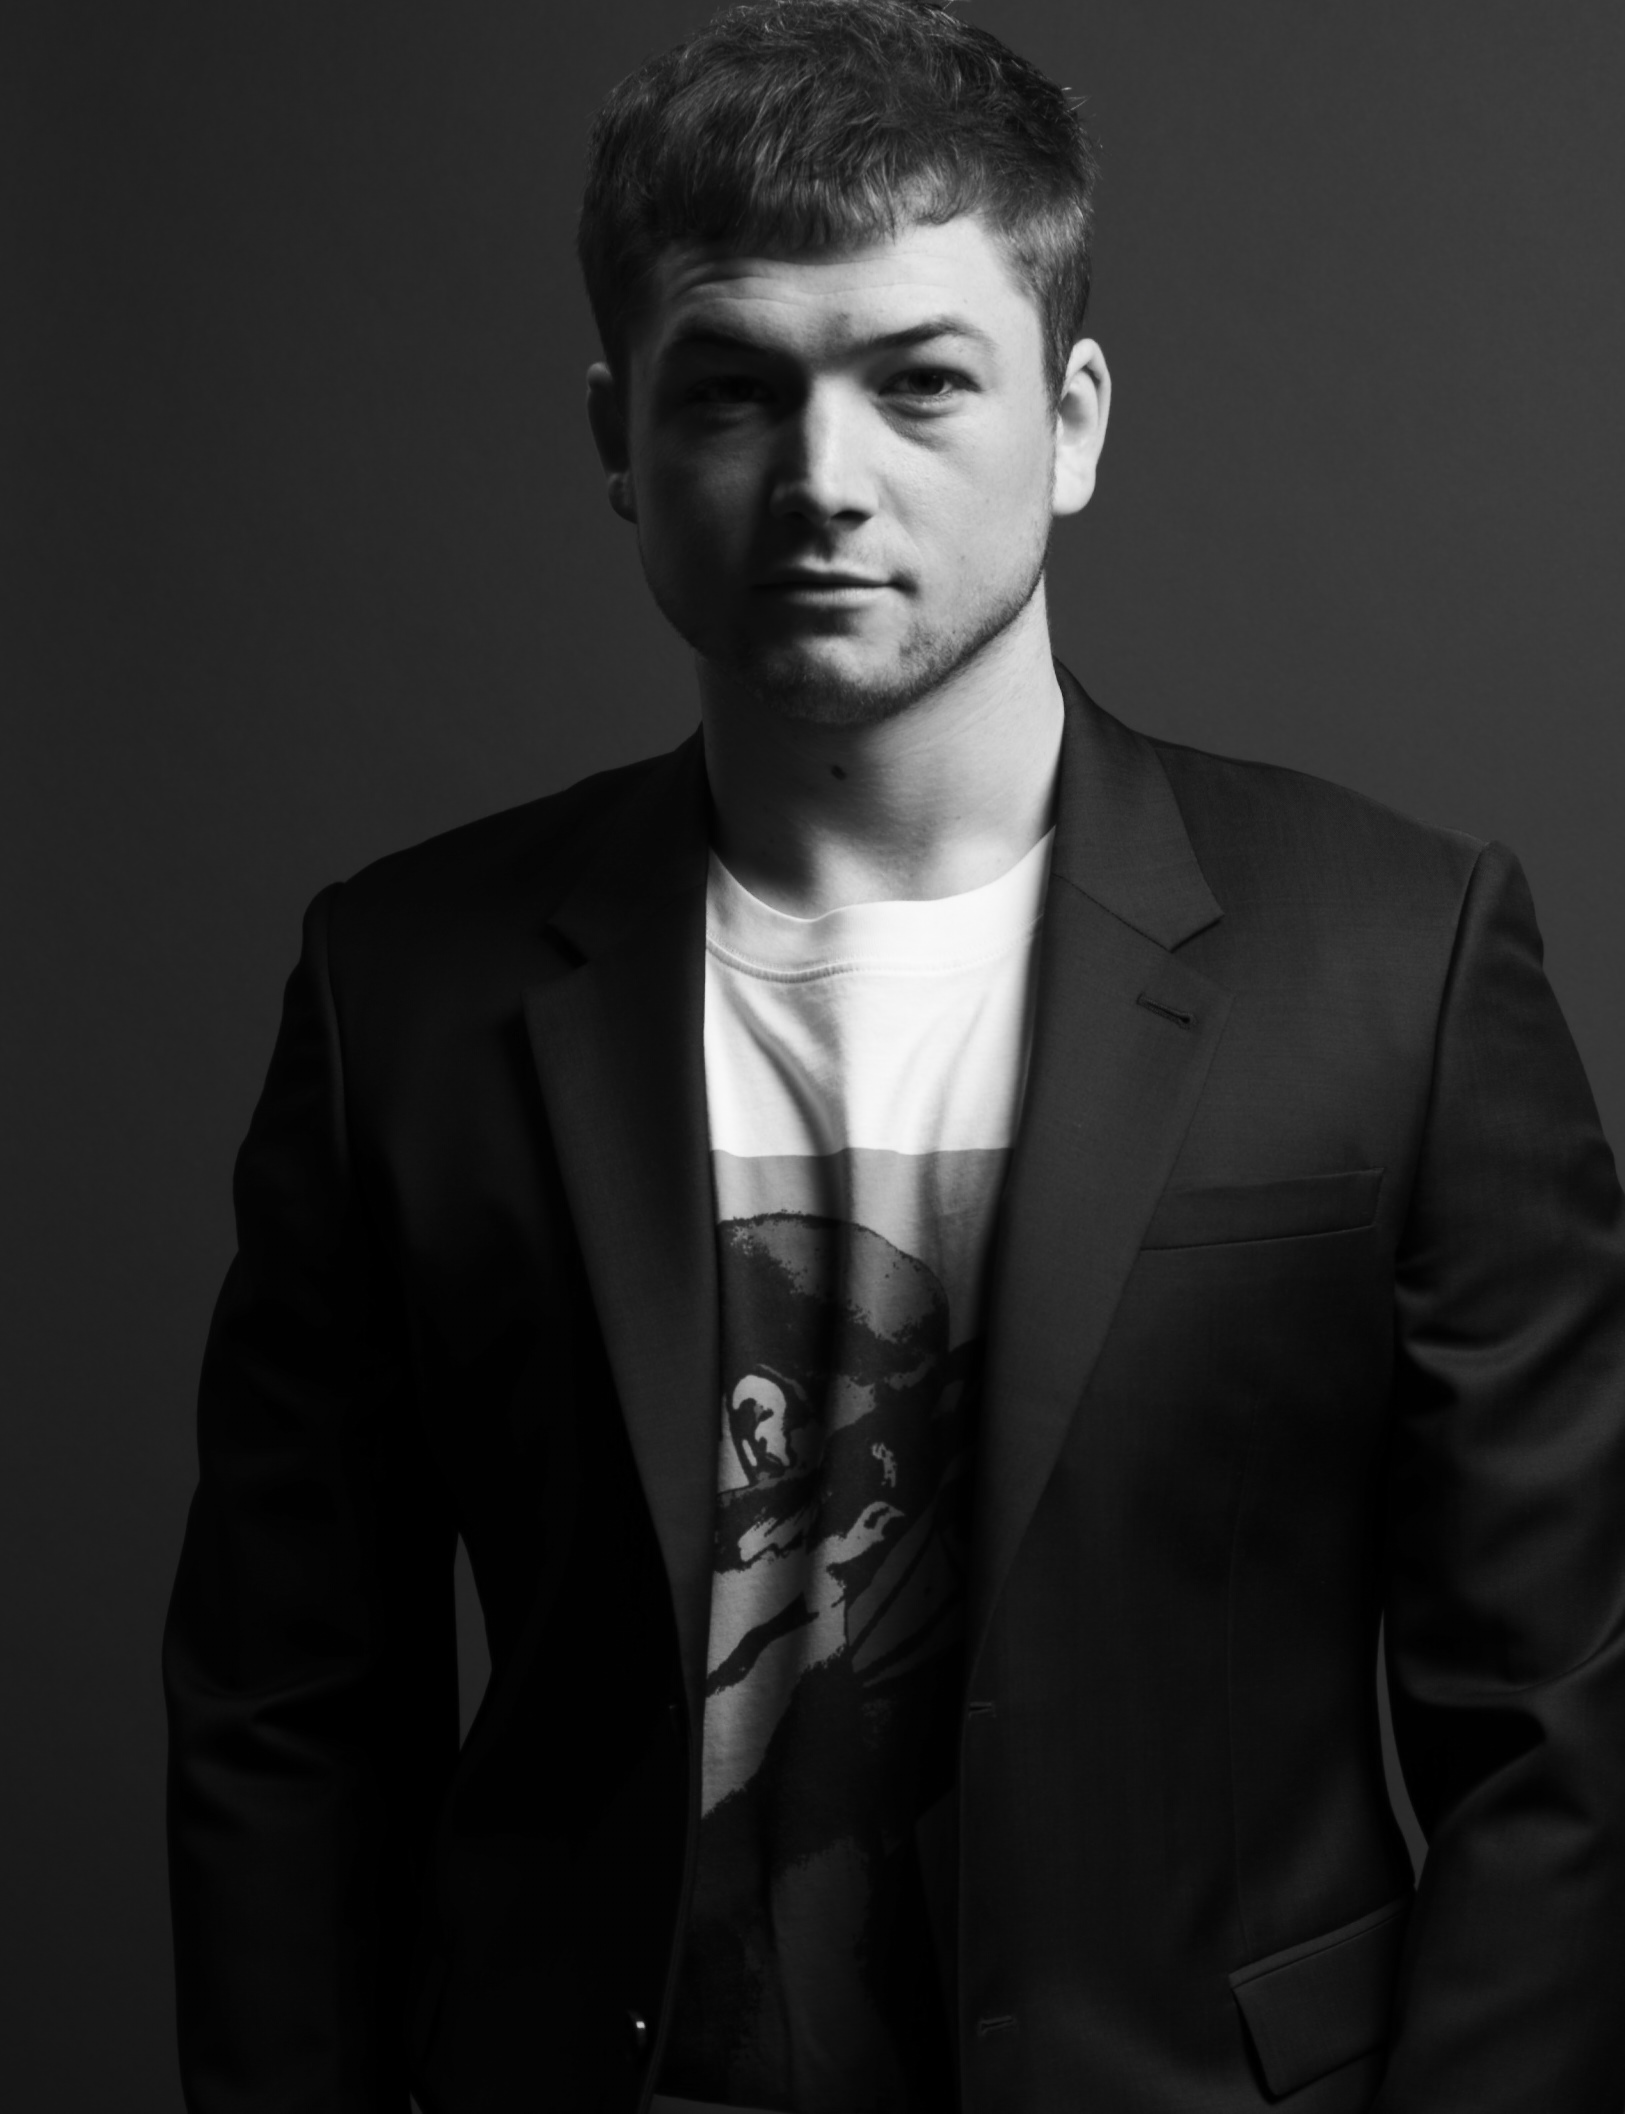 Taron Egerton Wallpapers High Quality Download Free.